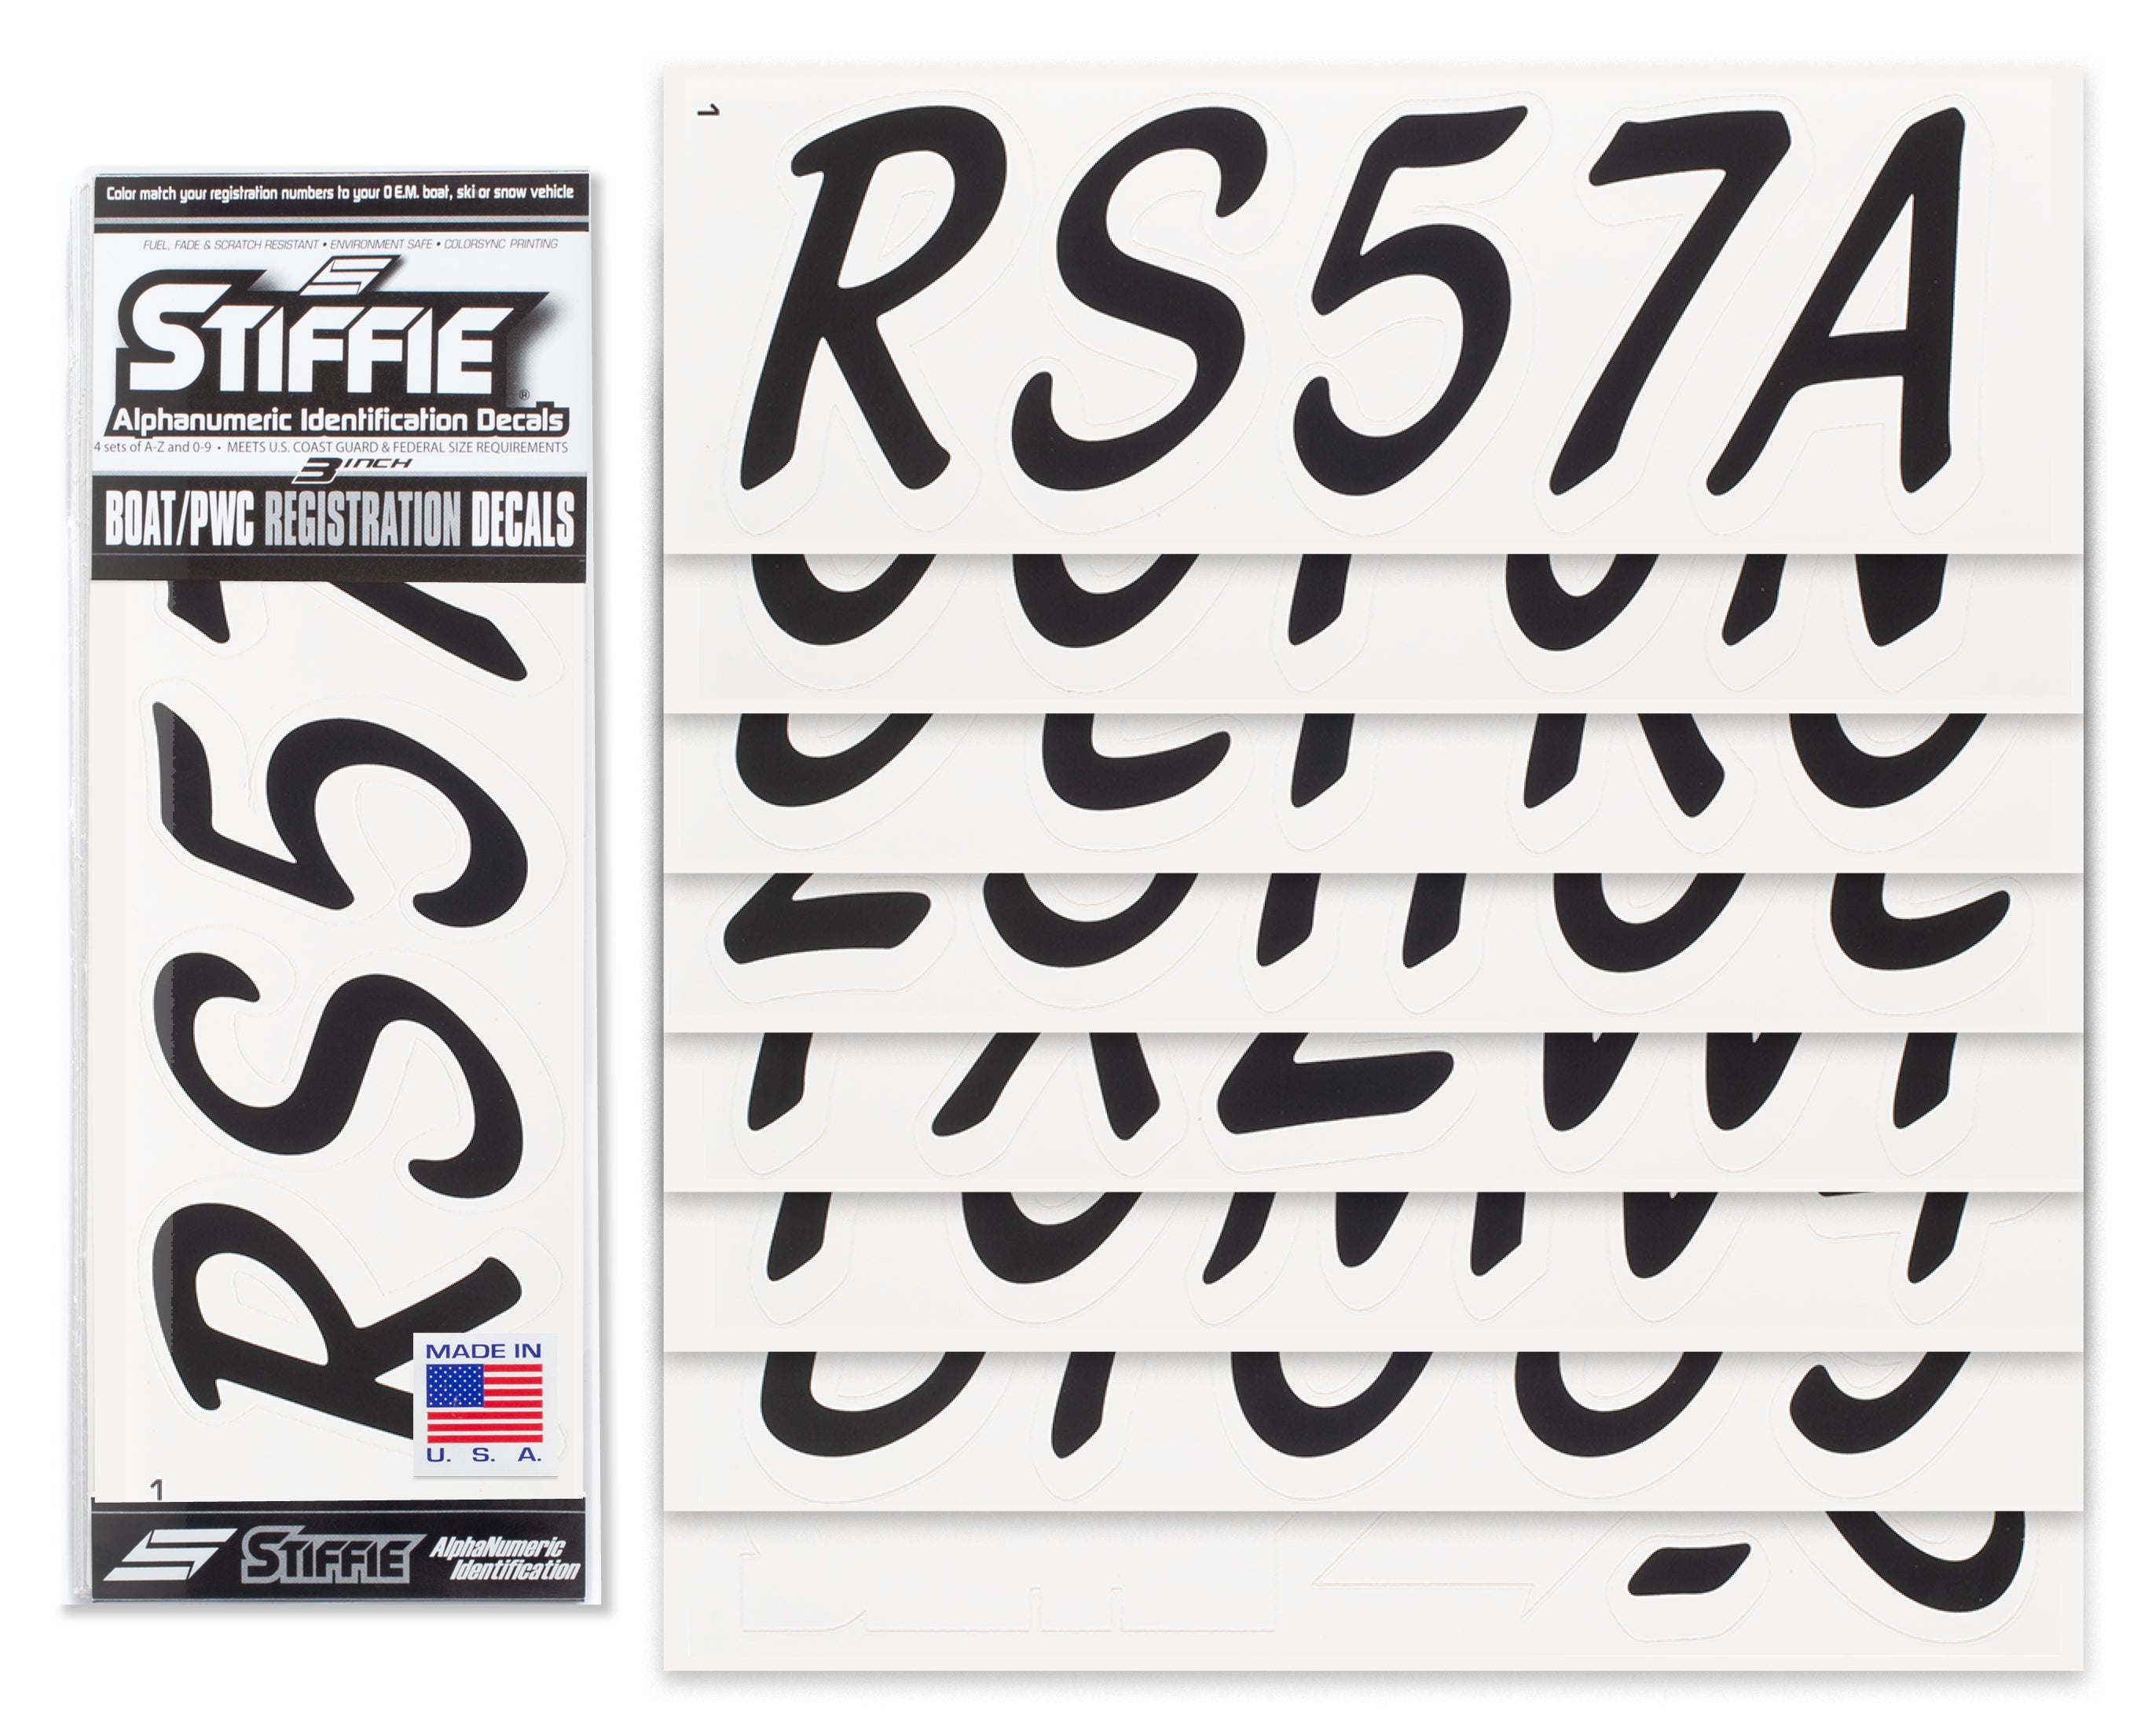 STIFFIE Whipline Solid Black/White 3" Alpha-Numeric Registration Identification Numbers Stickers Decals for Boats & Personal Watercraft